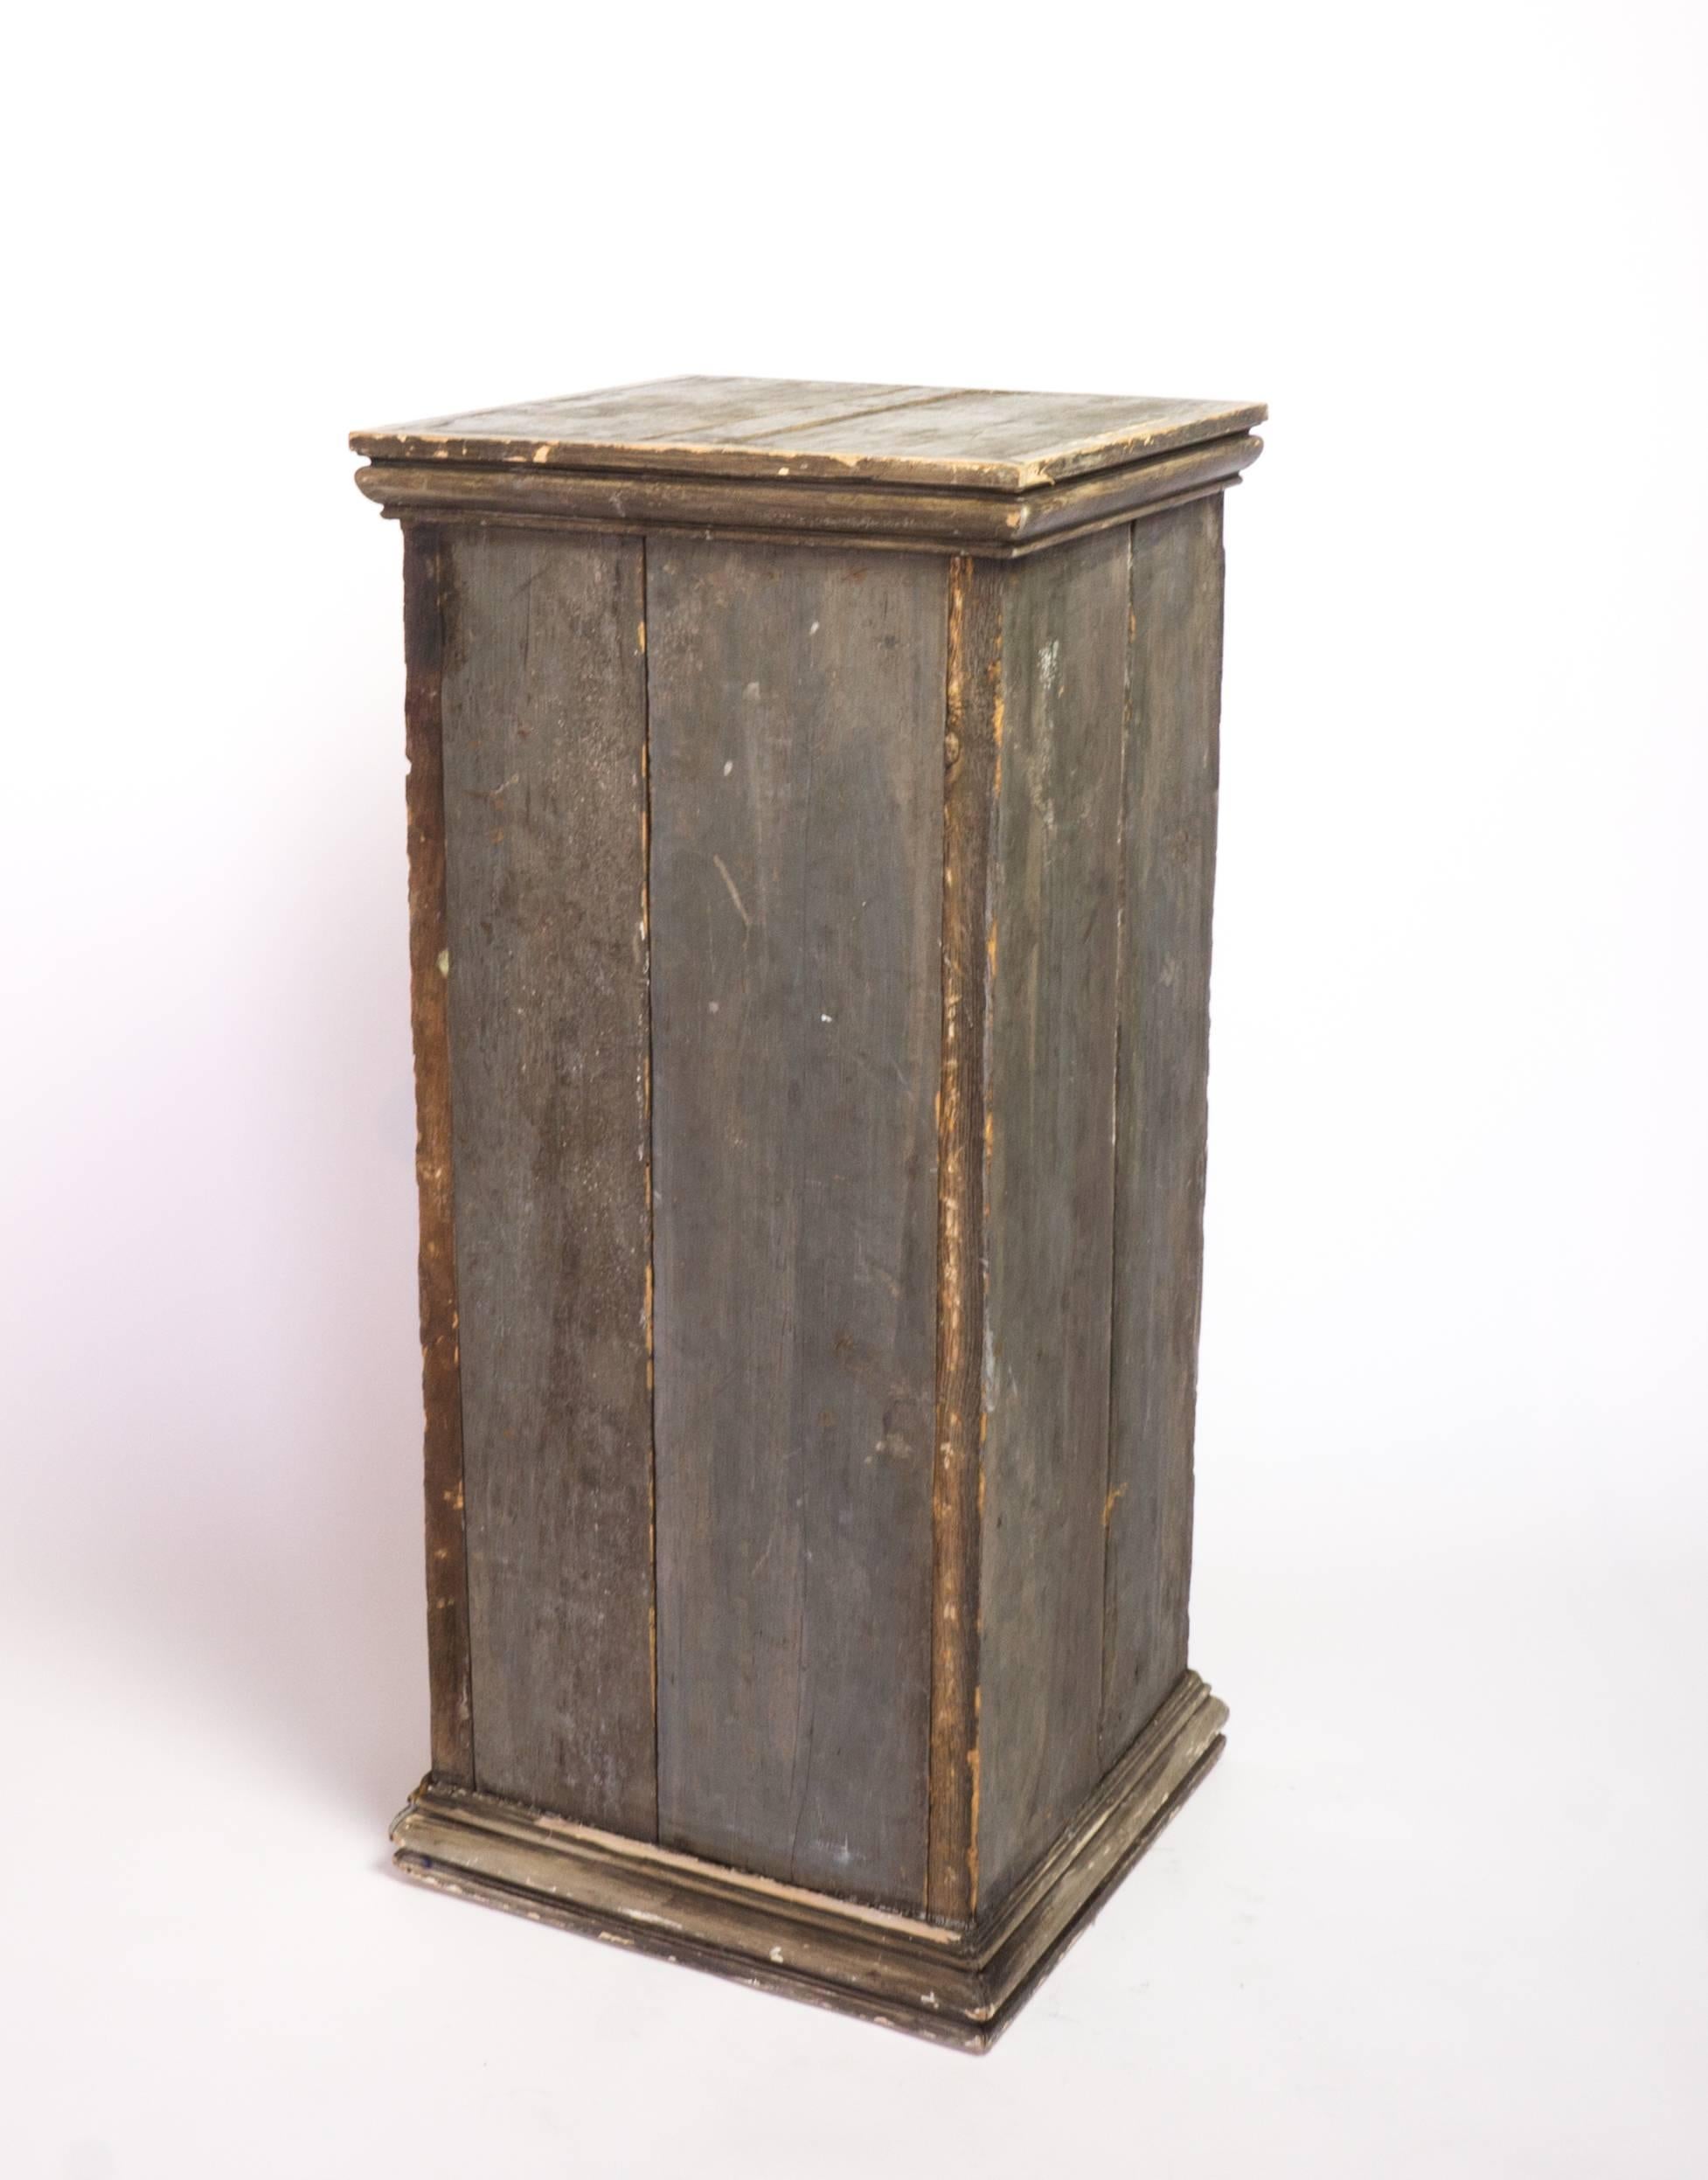 Early 20th century wood painted pedestal in original grey finish.